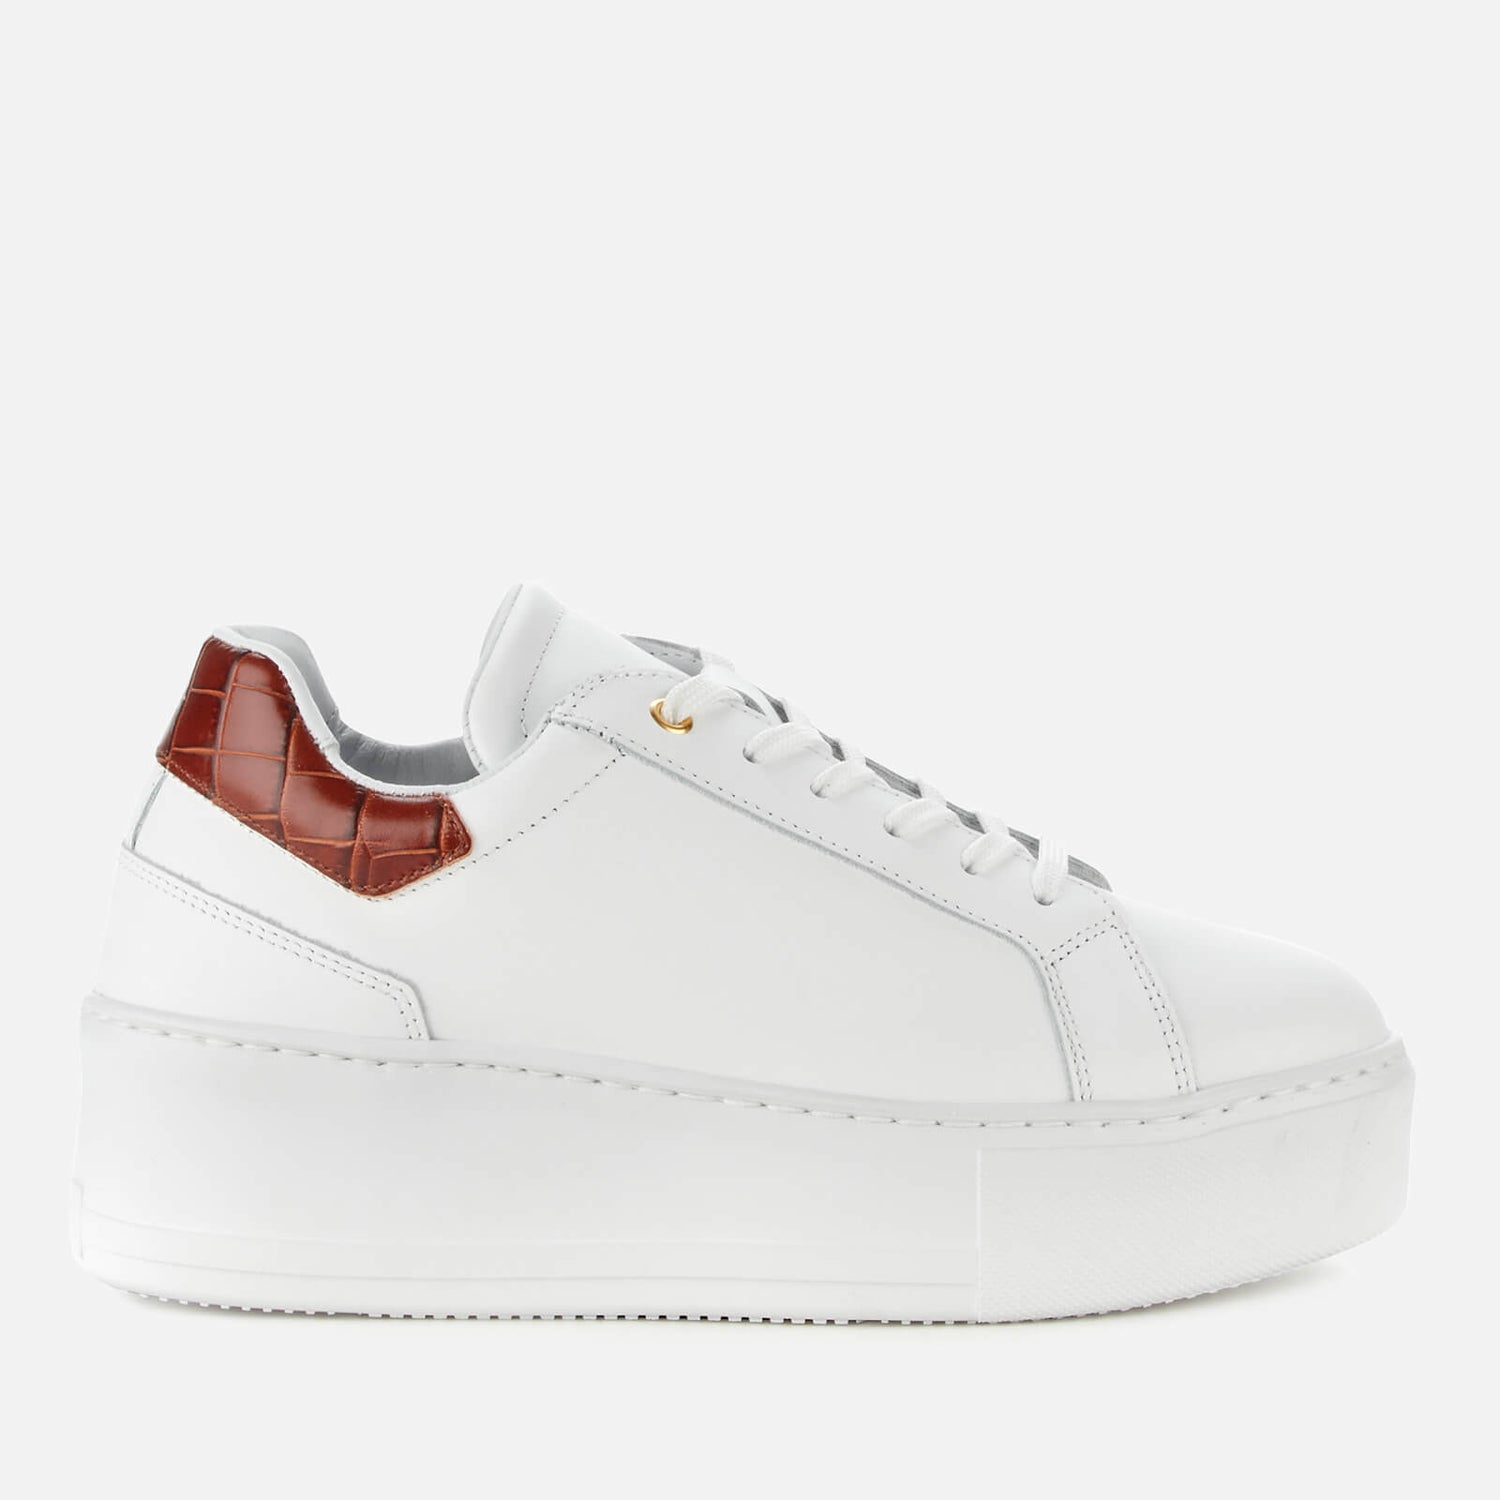 Dune Women's Elden Leather Flatform Trainers - White | FREE UK Delivery ...